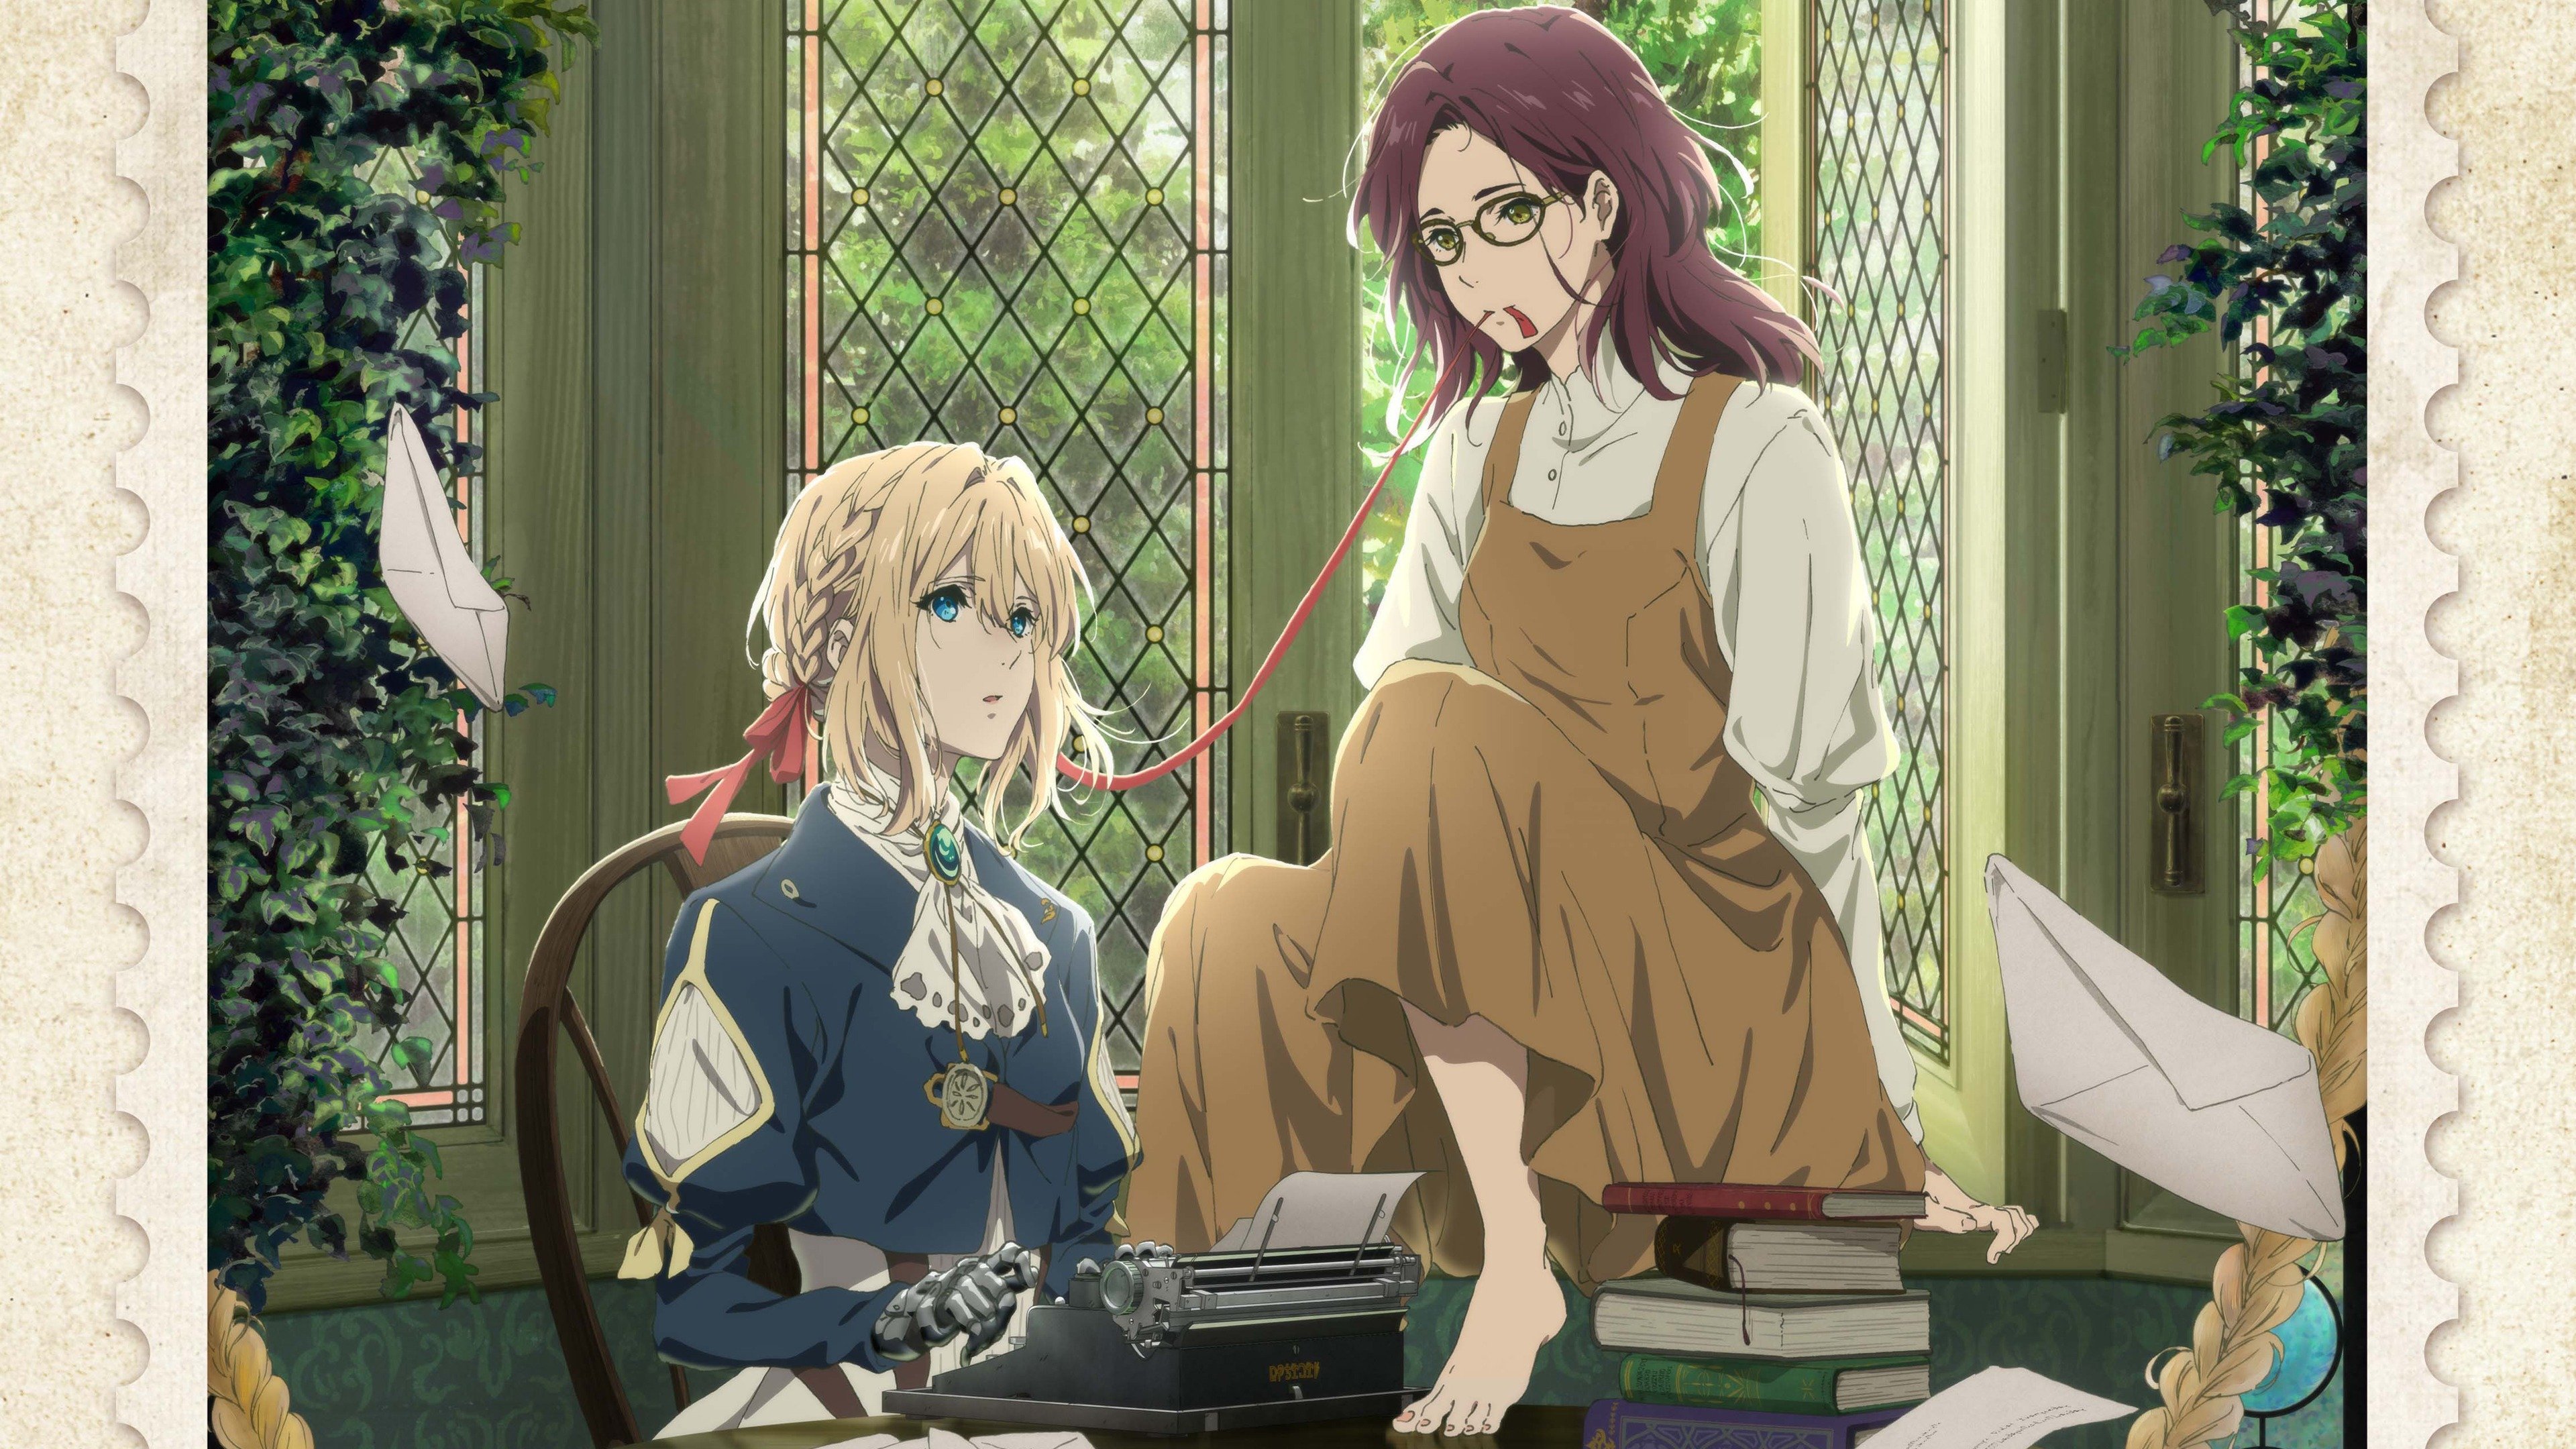 How to Watch Violet Evergarden in Order Read This First